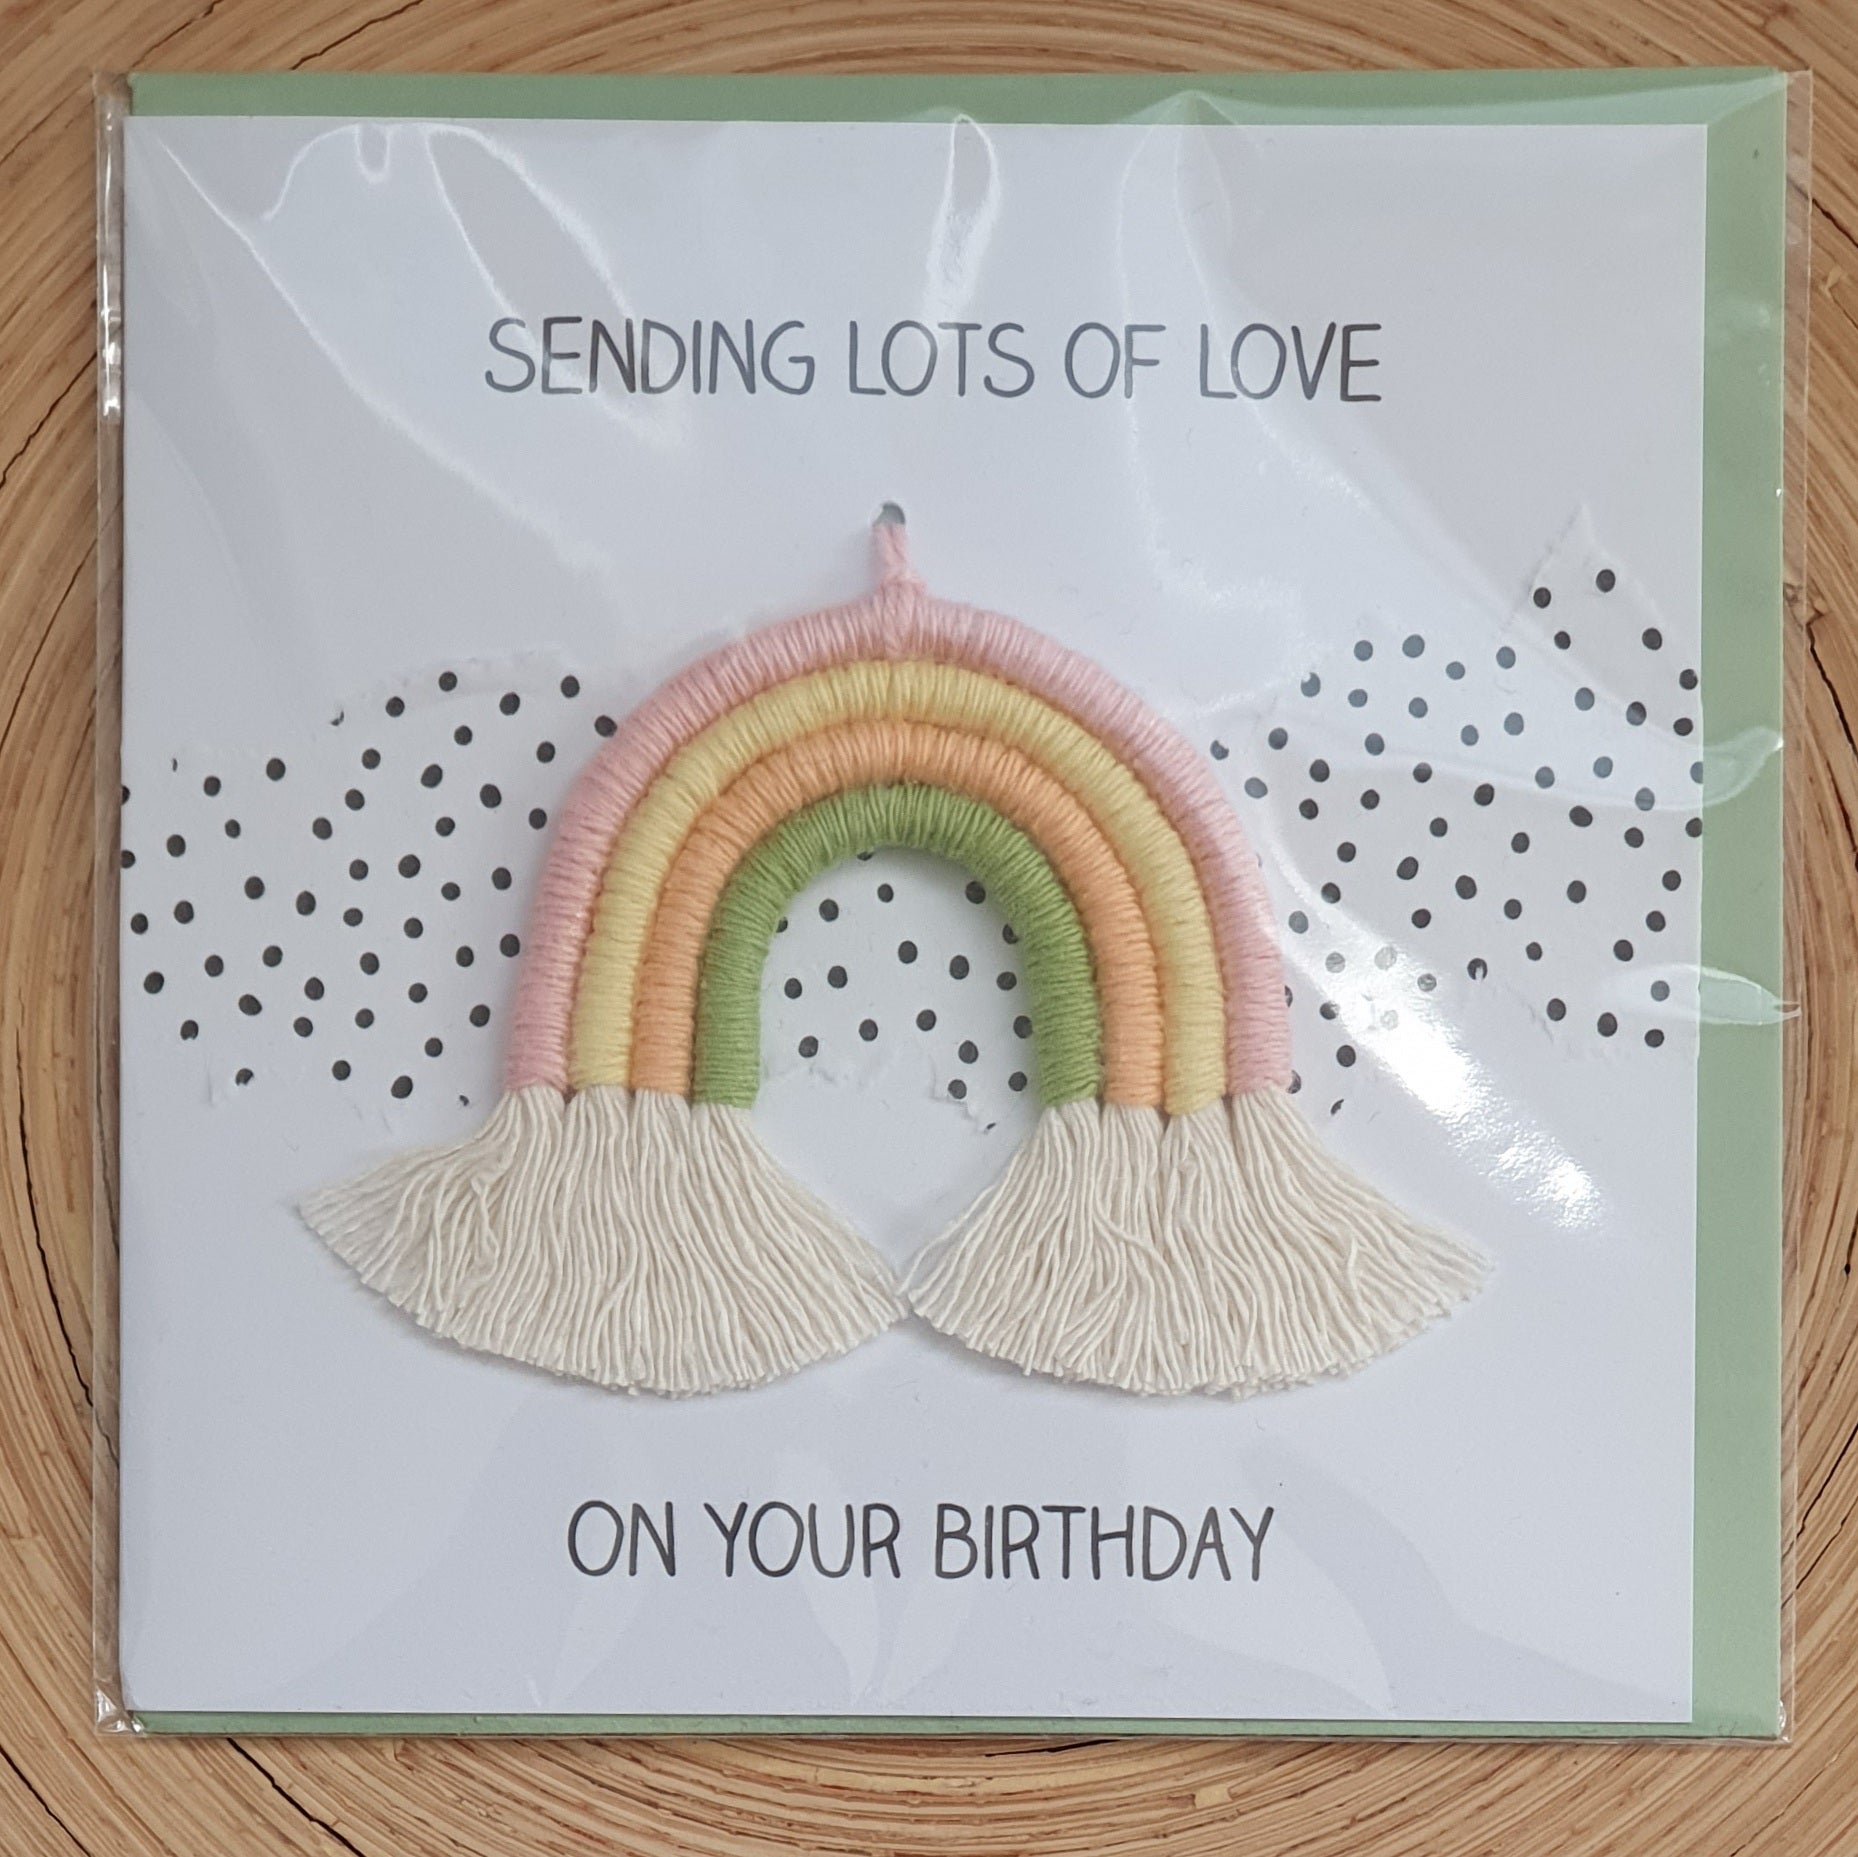 Sending Love on your Birthday with Miniature Rainbow - Soft Pastels/Sage Green